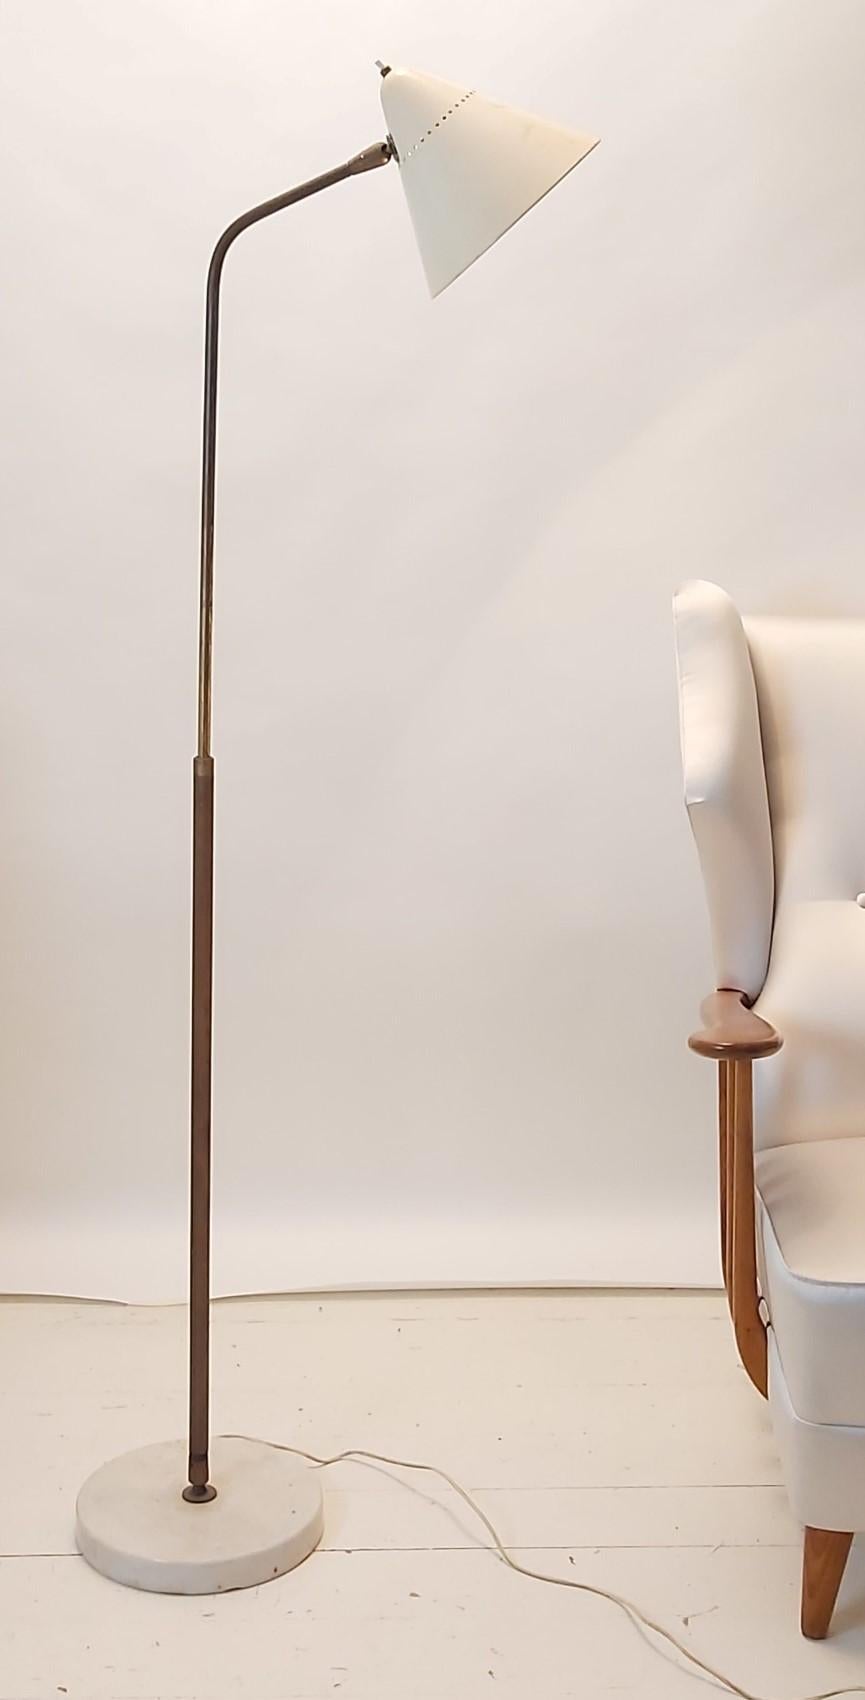 Lacquered Mid-Century Modern Adjustable Floor Lamp by F. Ostuni for Oluce Rare Italy 1950s For Sale